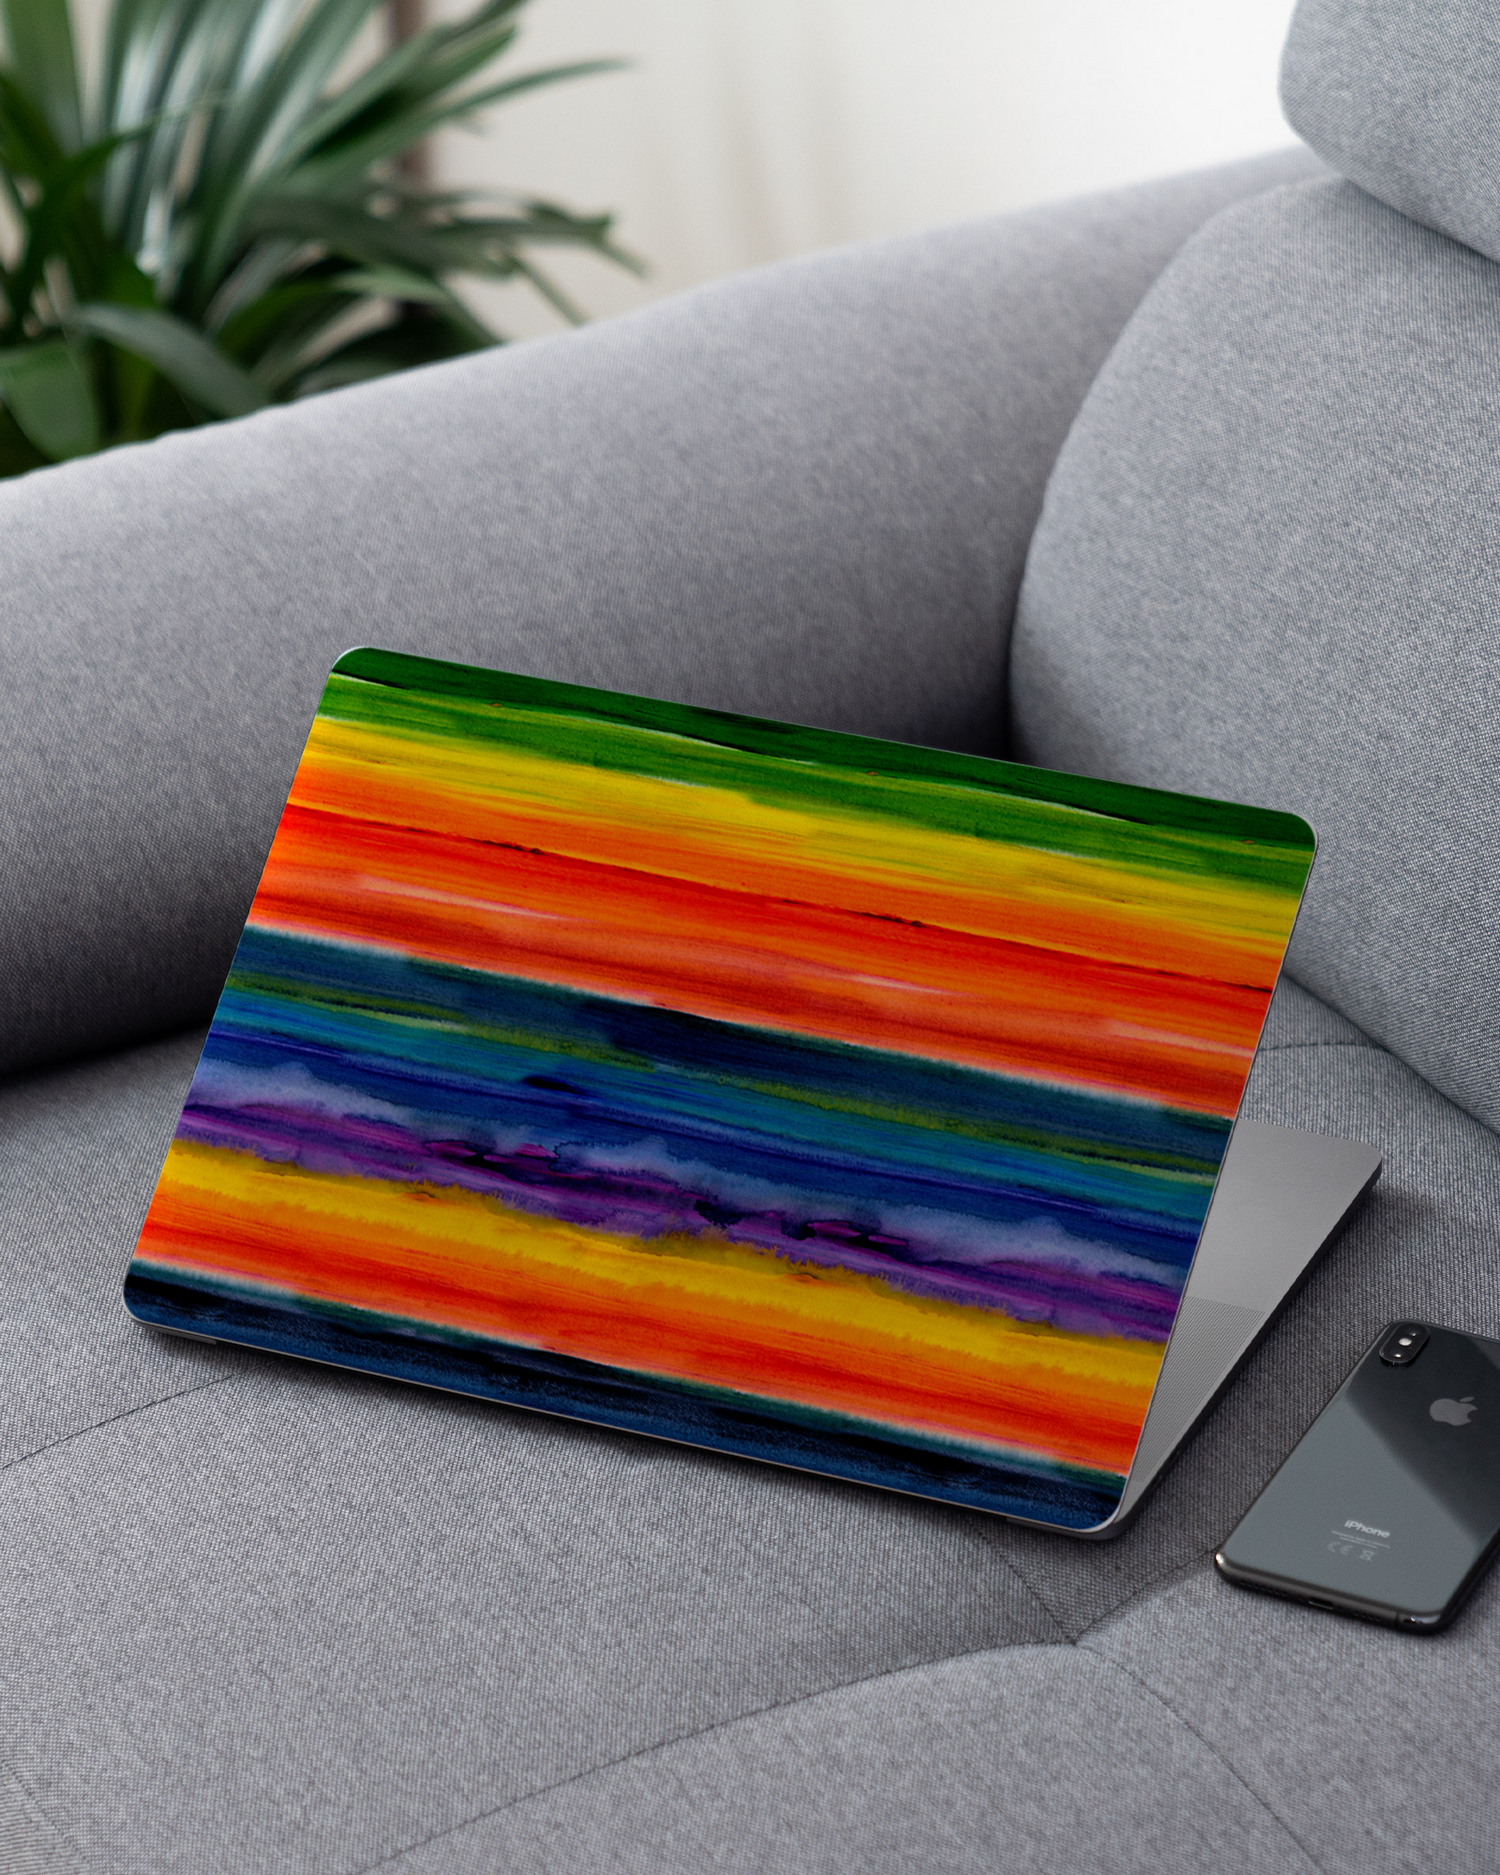 Striped Tie Dye Laptop Skin for 13 inch Apple MacBooks on a couch